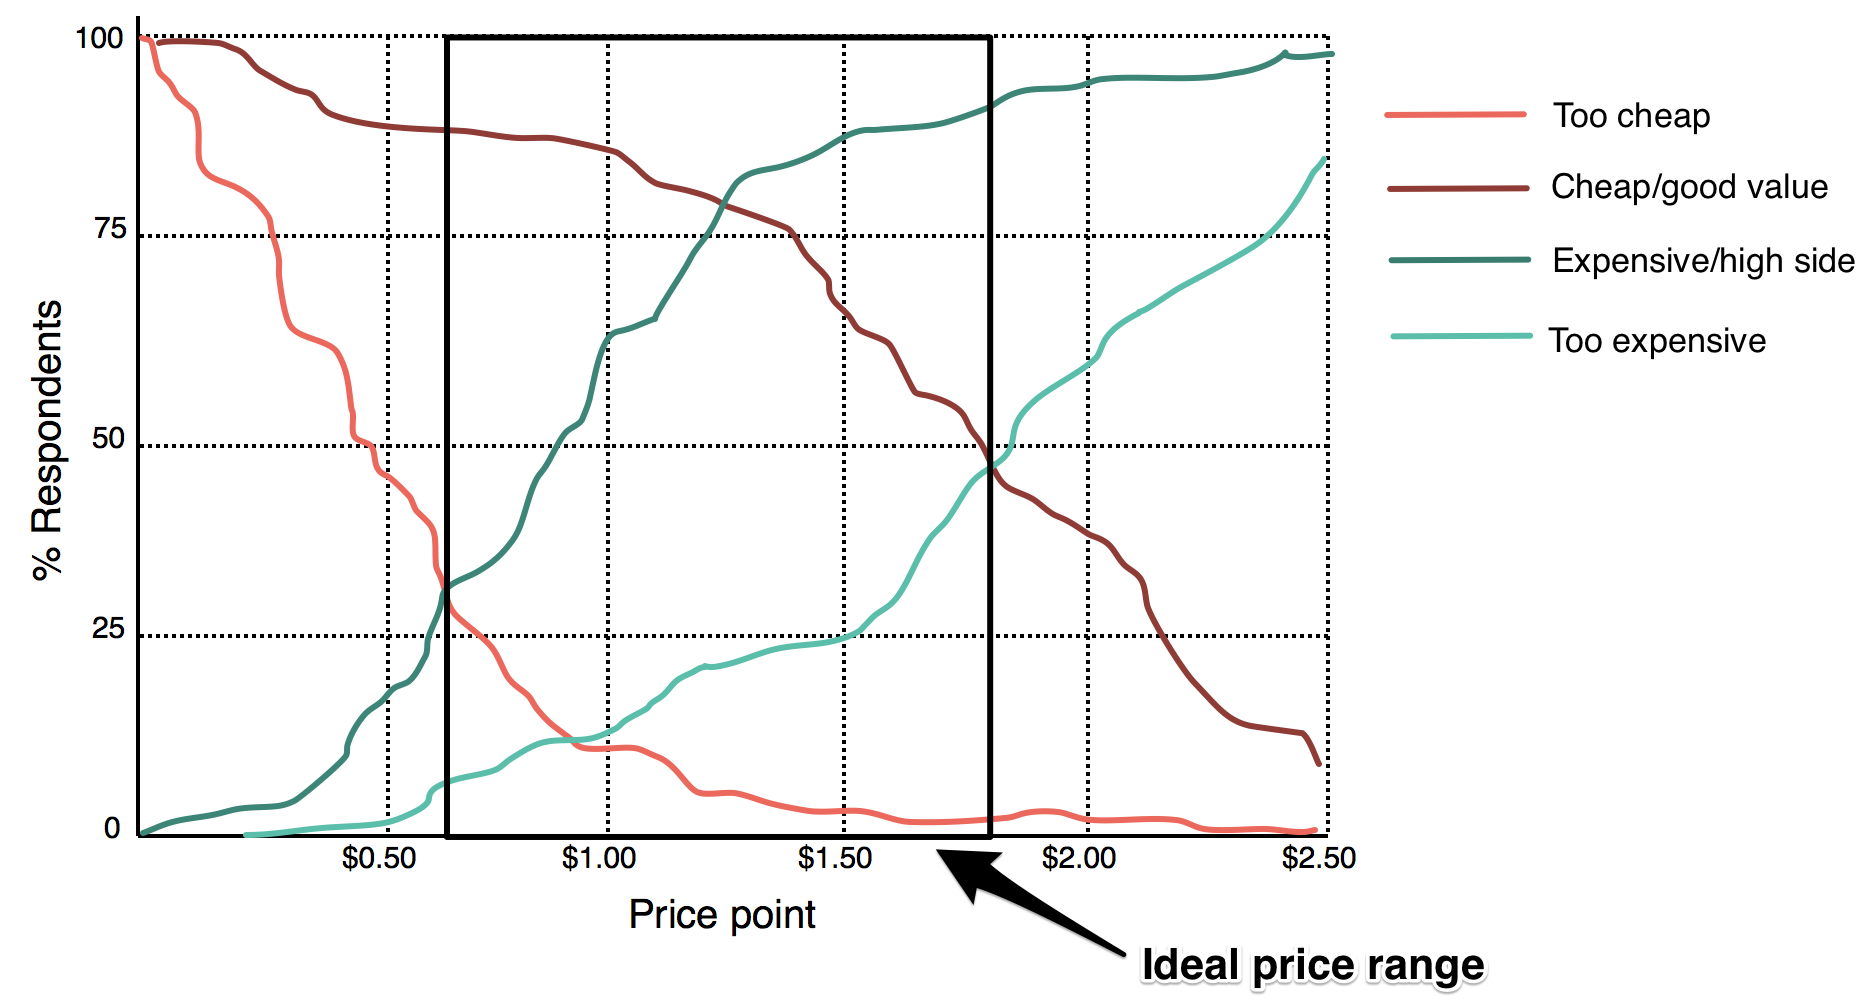 Chart plots different price ranges by customer perception, ranging from too cheap, to too expensive. Idea price range lies between good value and expensive 